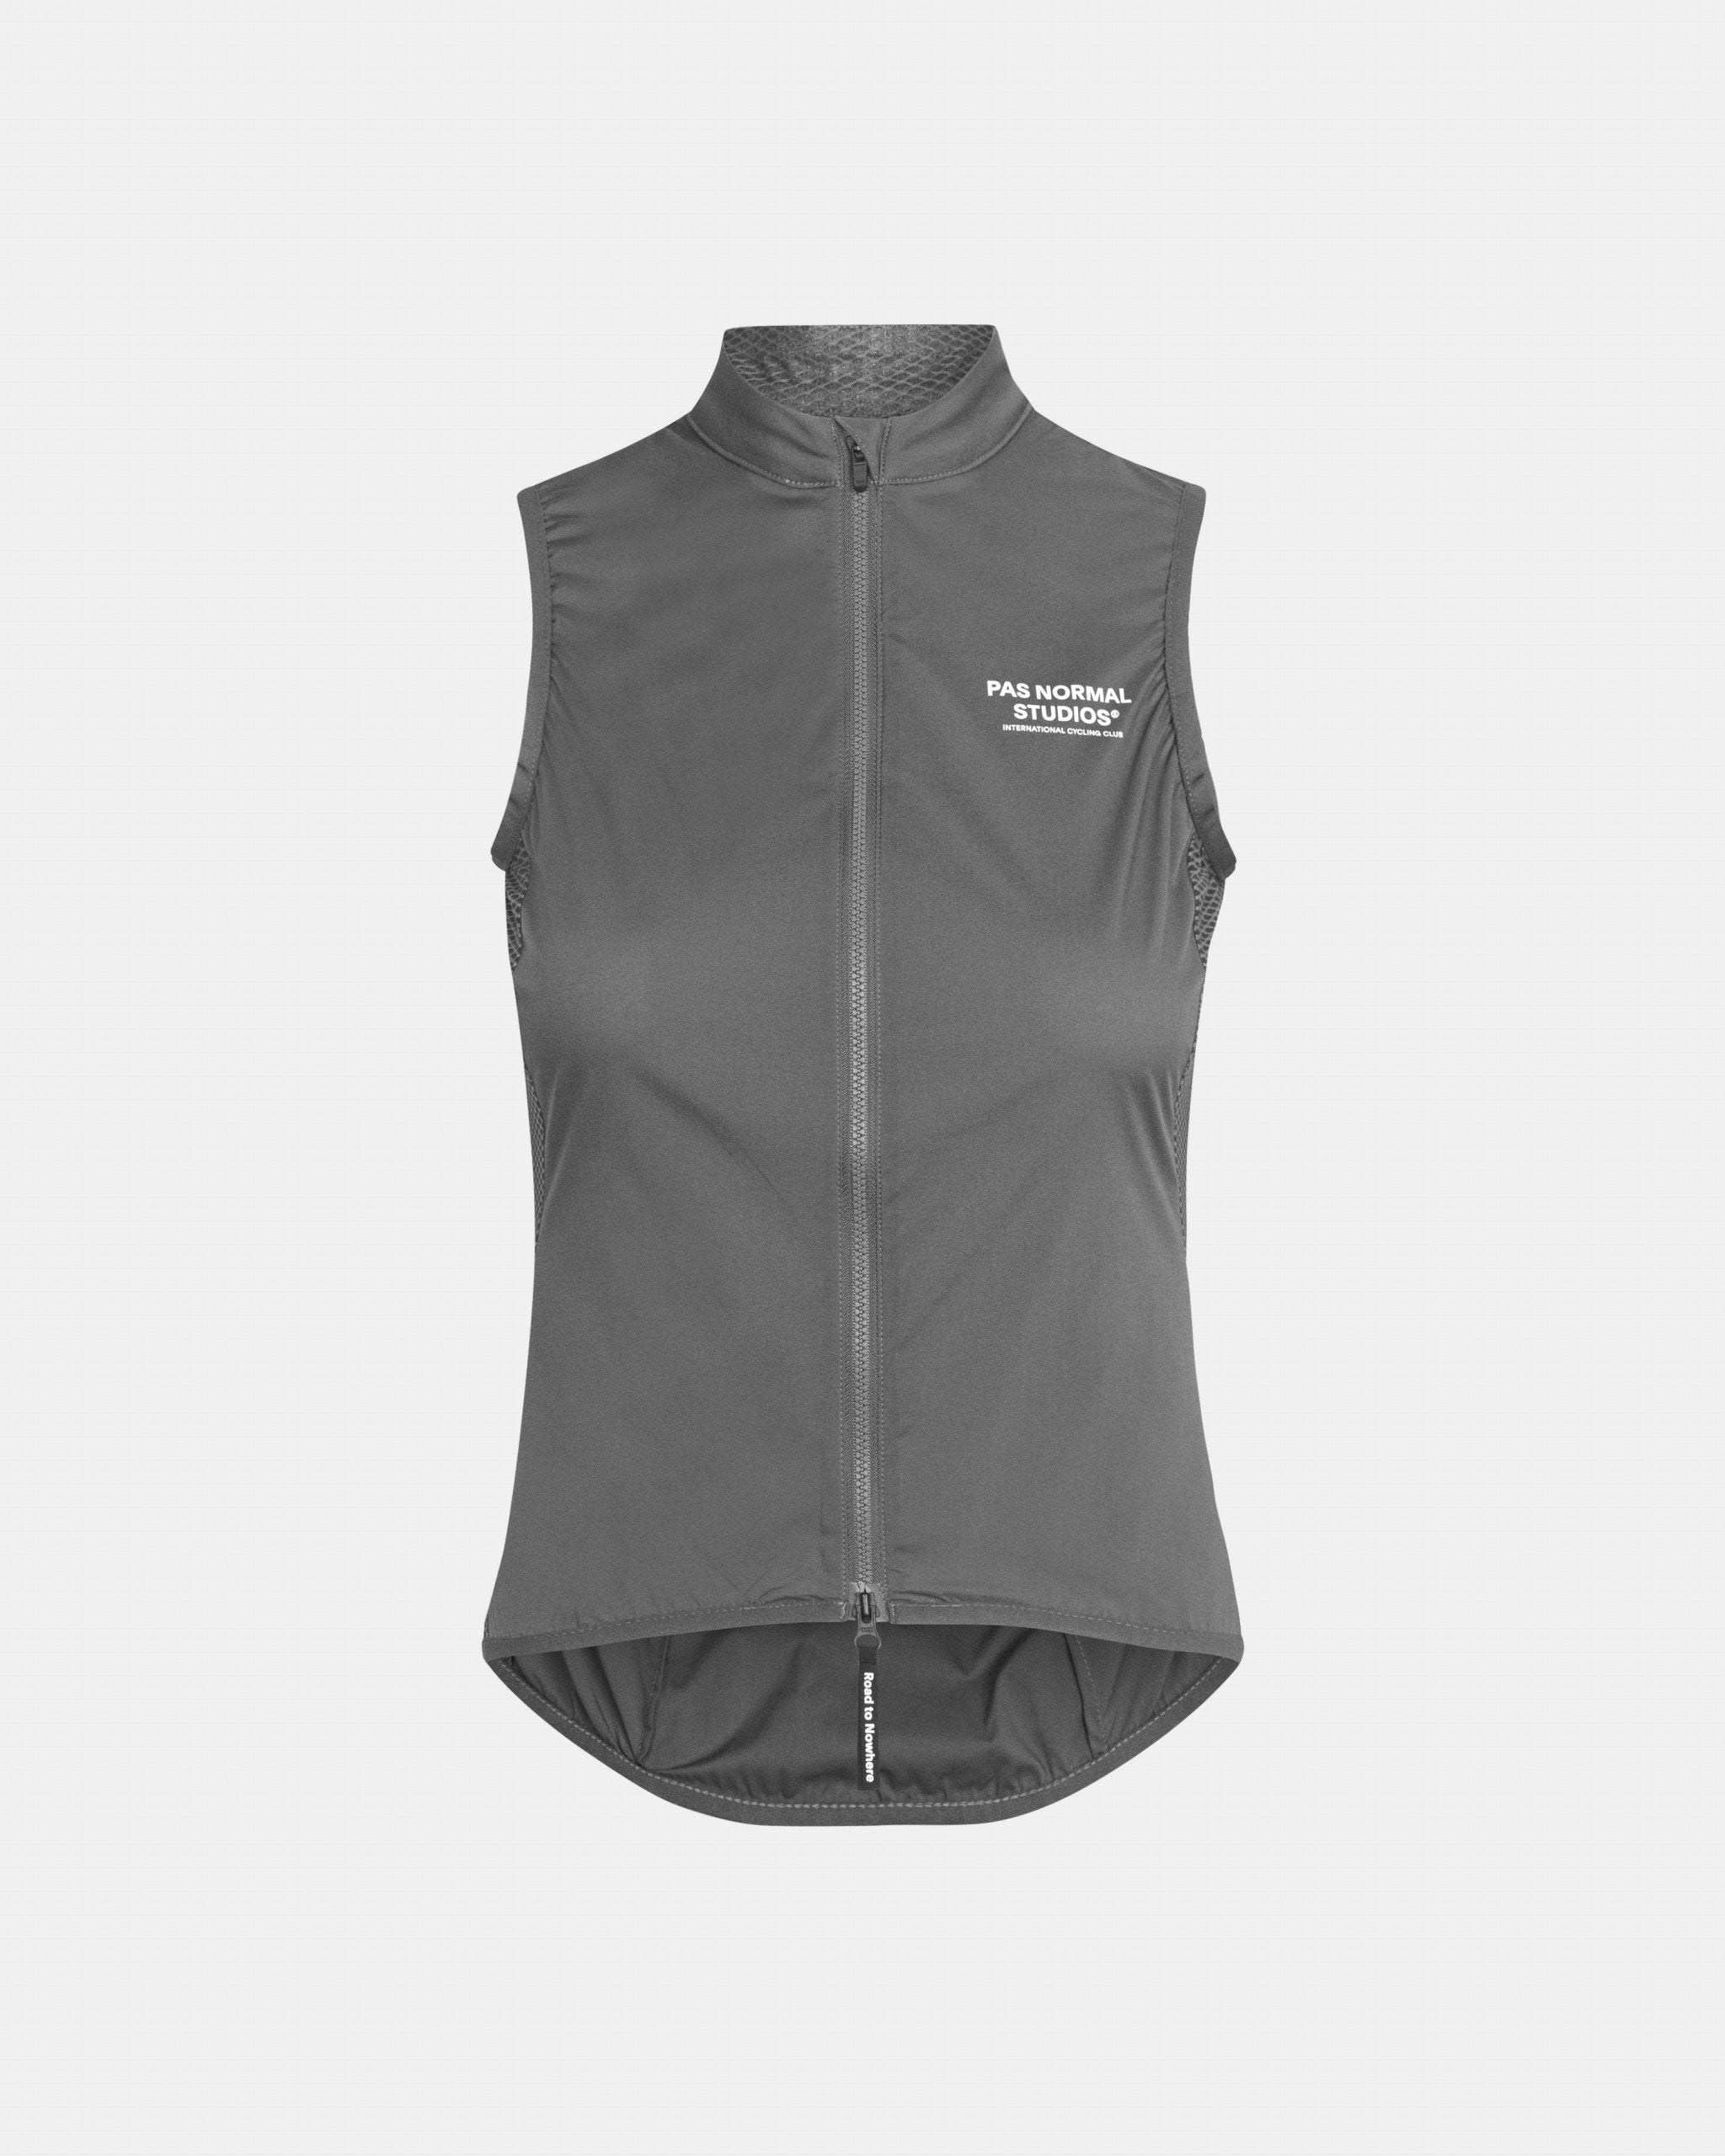 Pas Normal Studios - Cycling Vests only at Enroute.cc